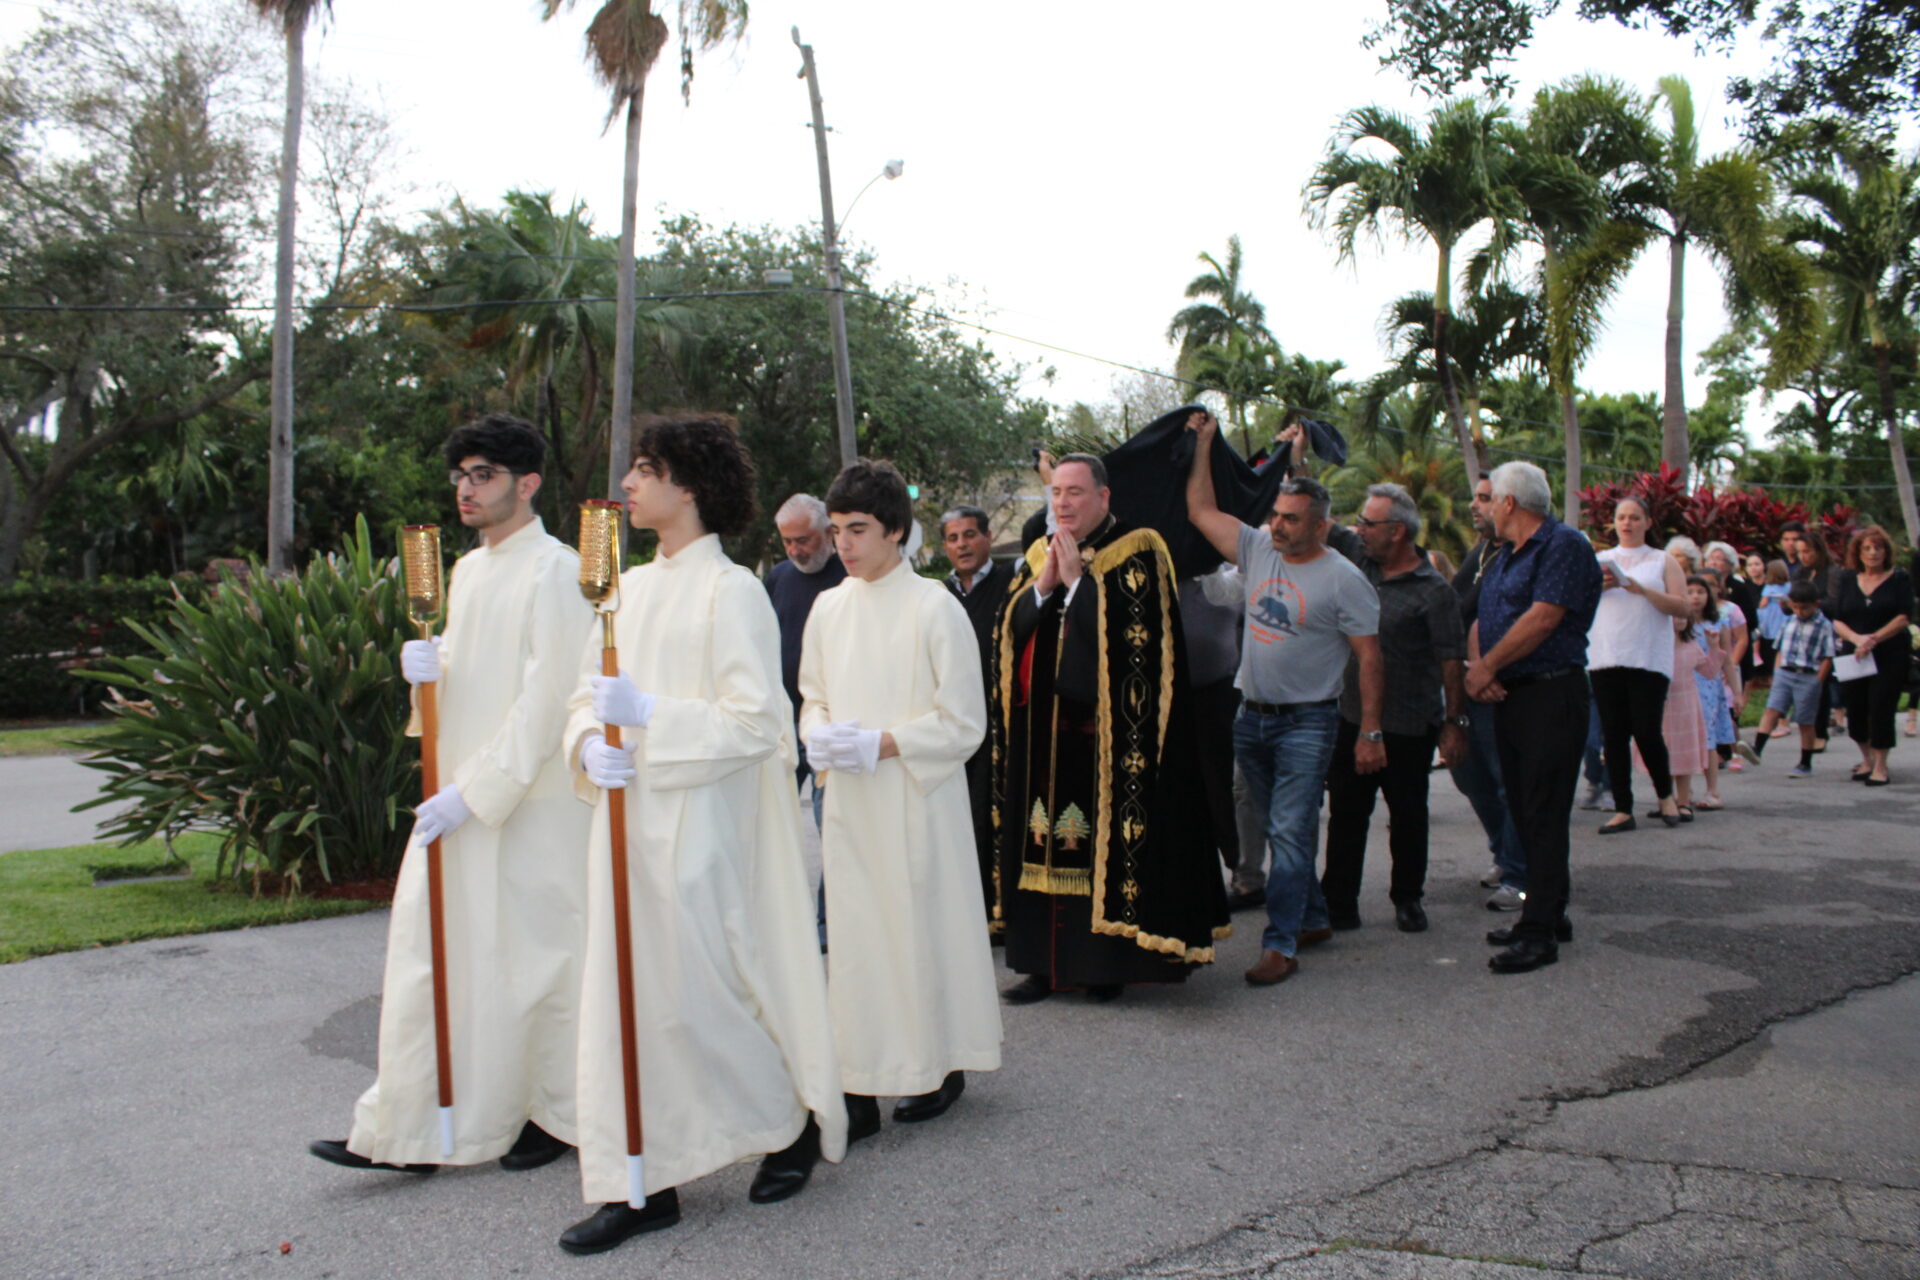 A parade with three sacristans in front